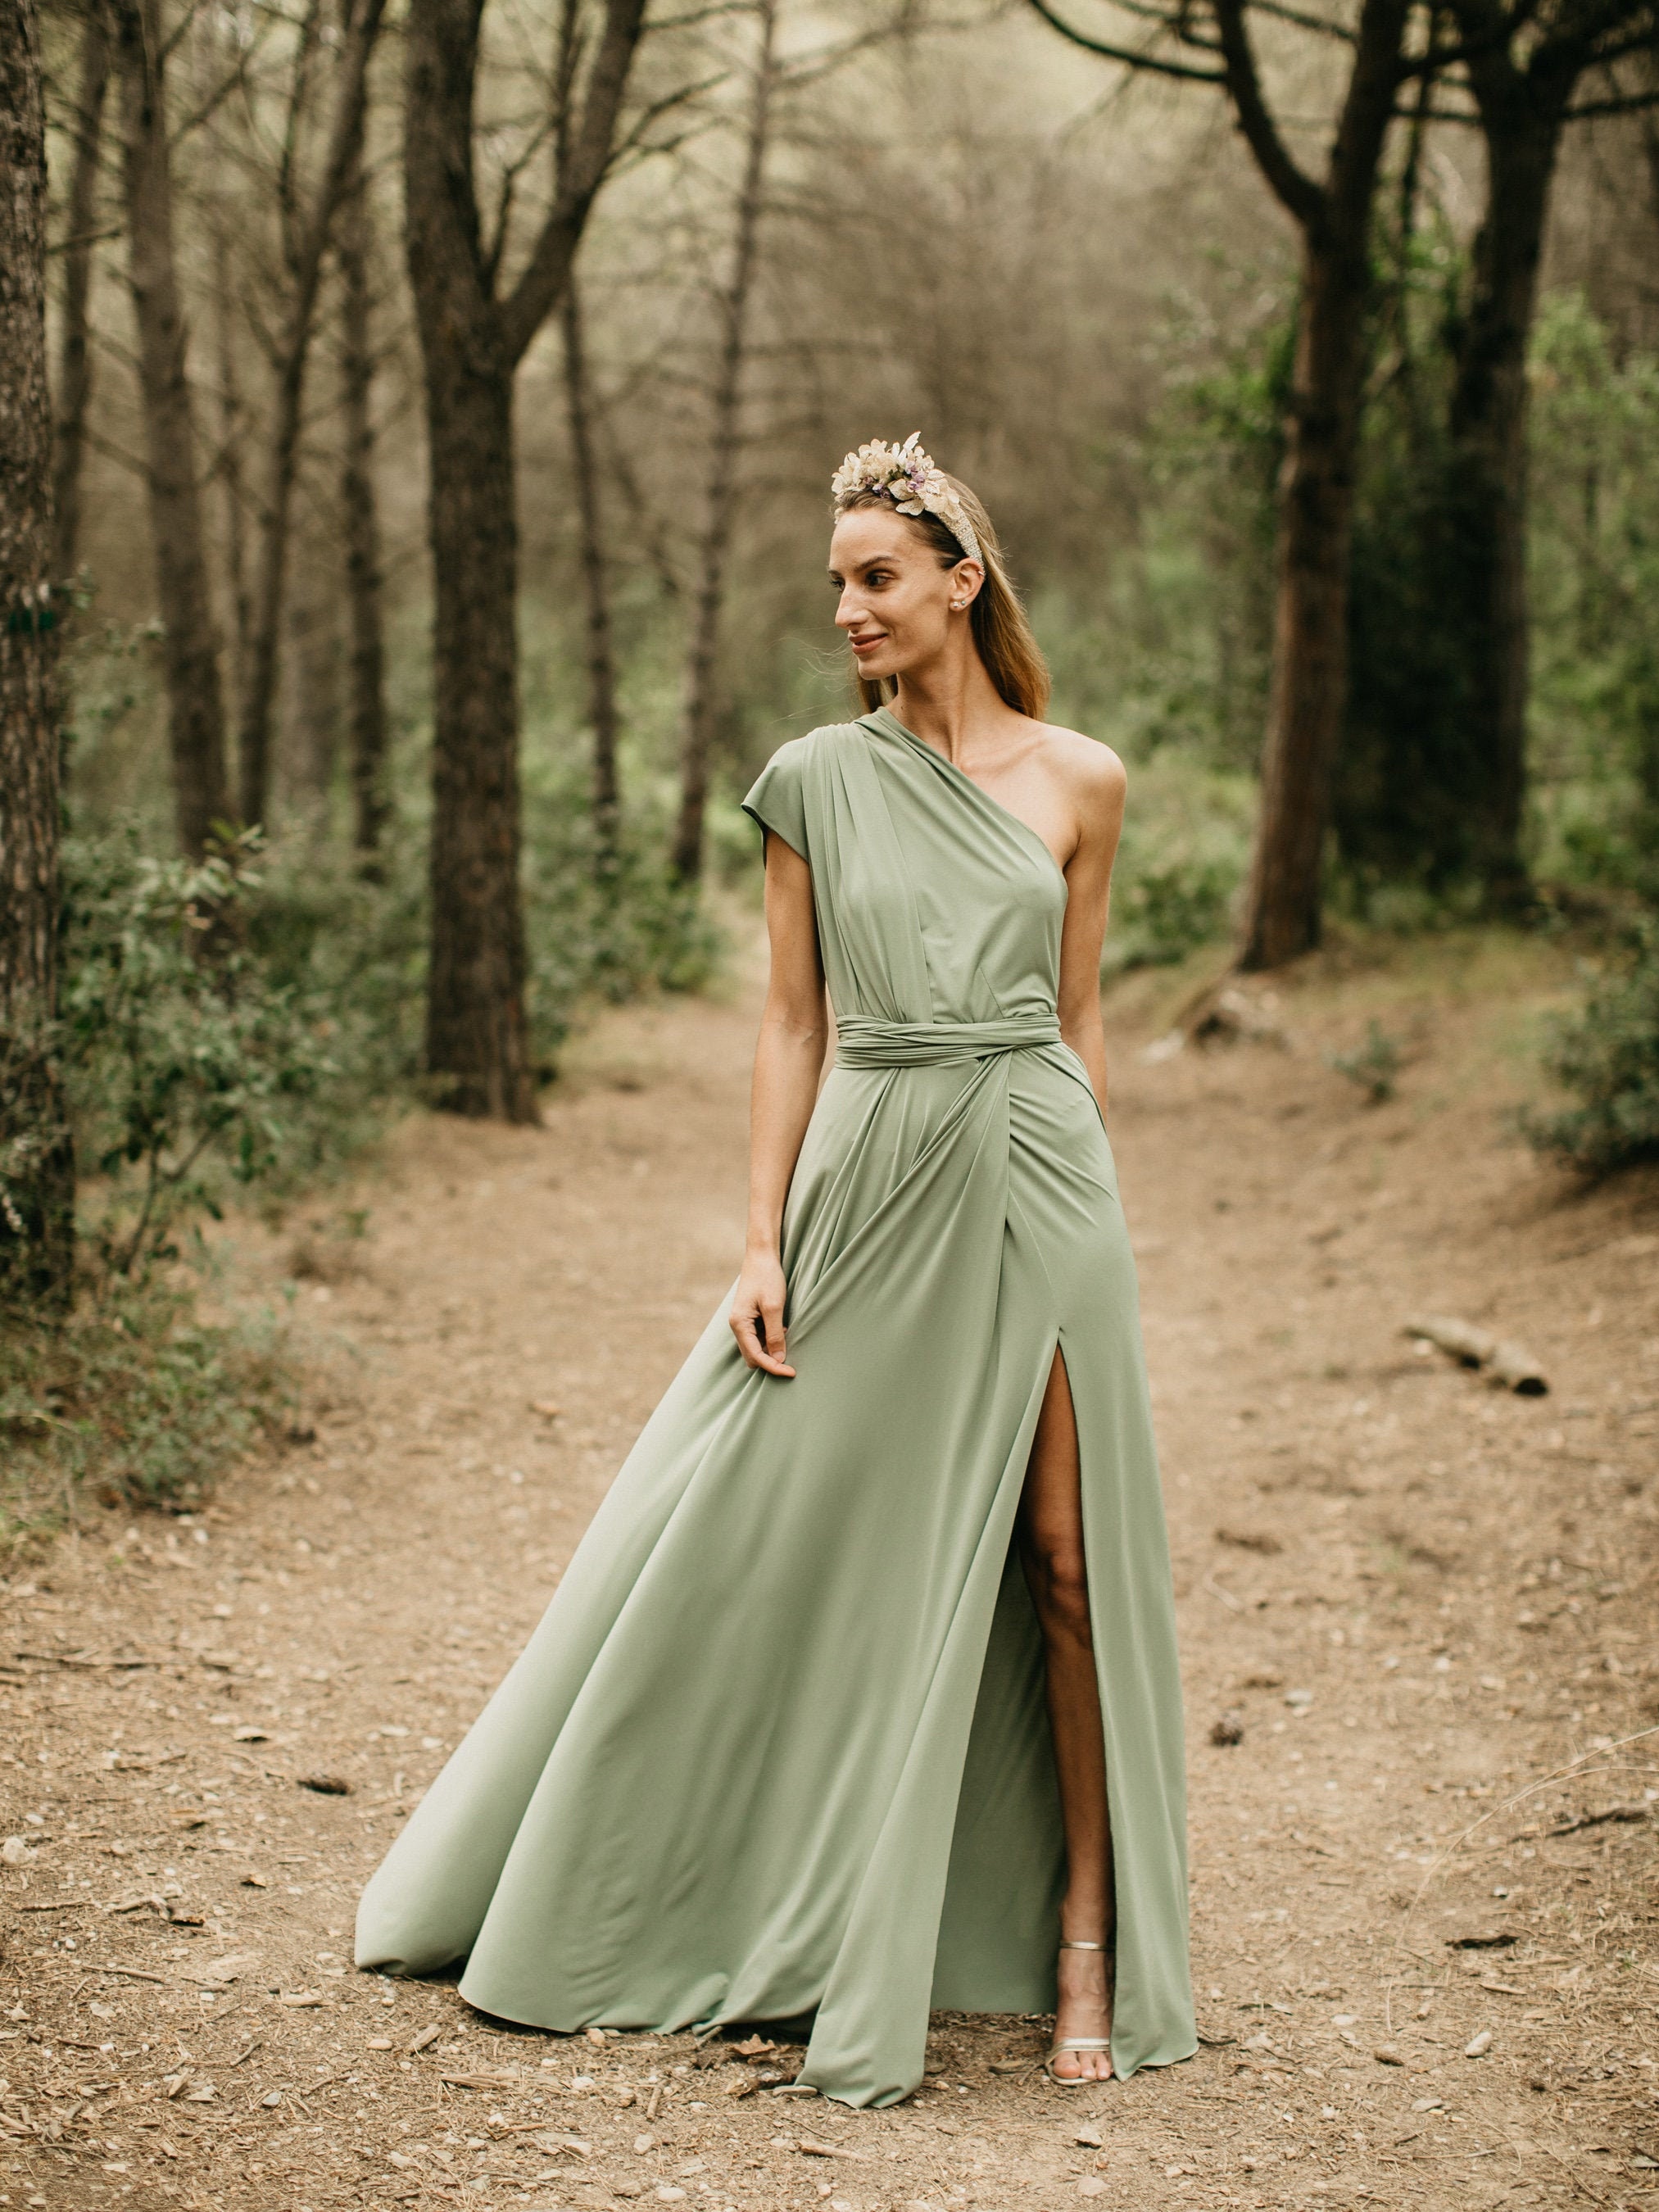 Sparkly Pastel Green Long Prom Dresses with Pockets FD2518 – Viniodress